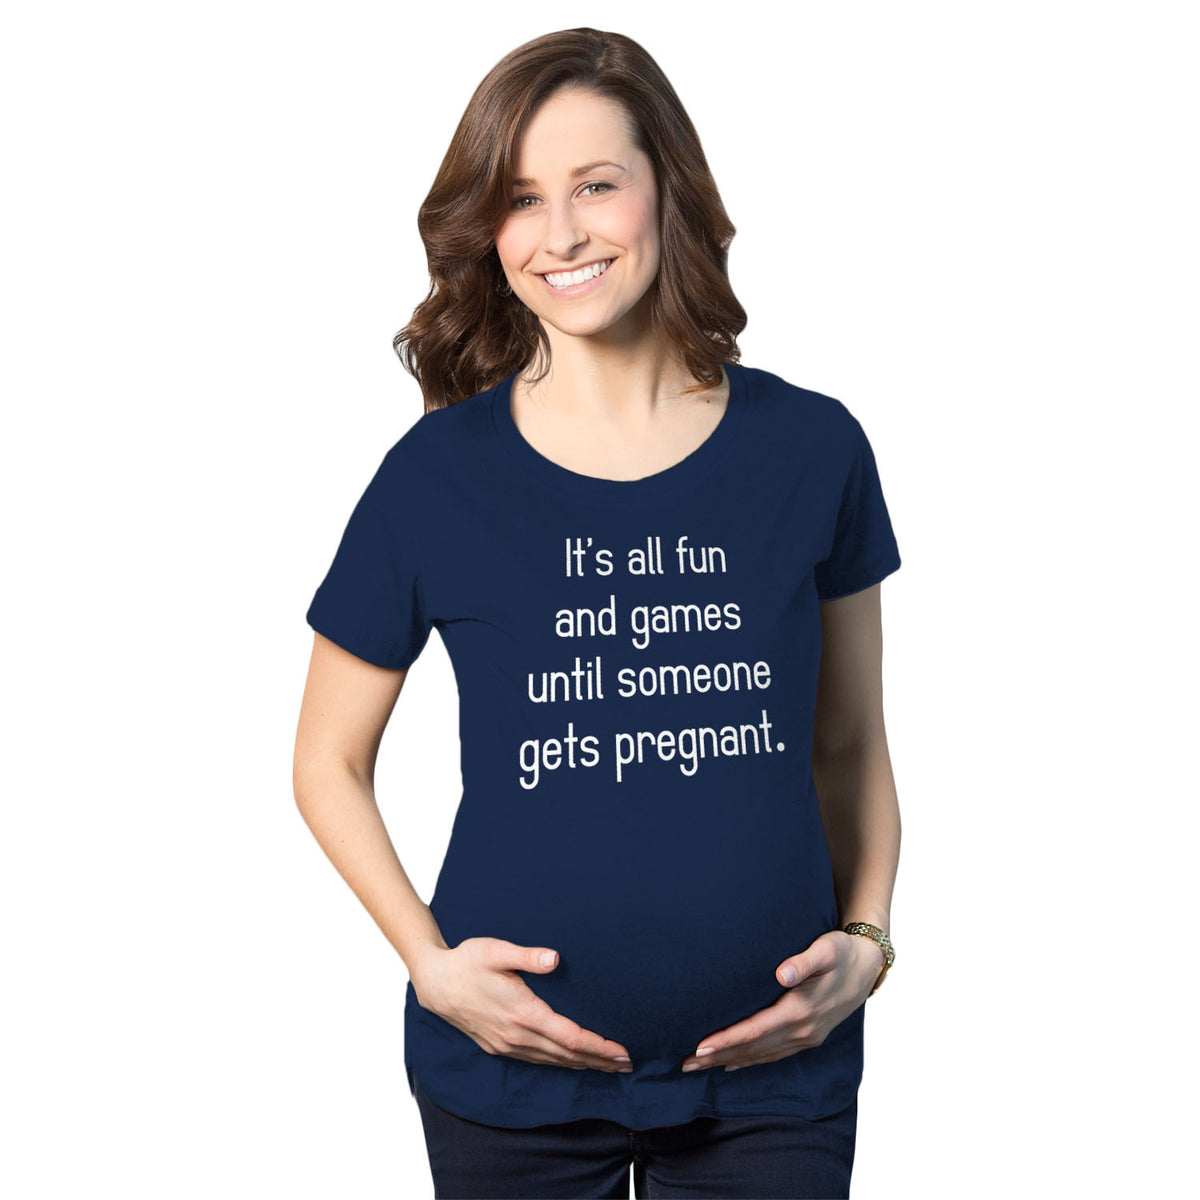 Funny Fun And Games Maternity T Shirt Nerdy Tee